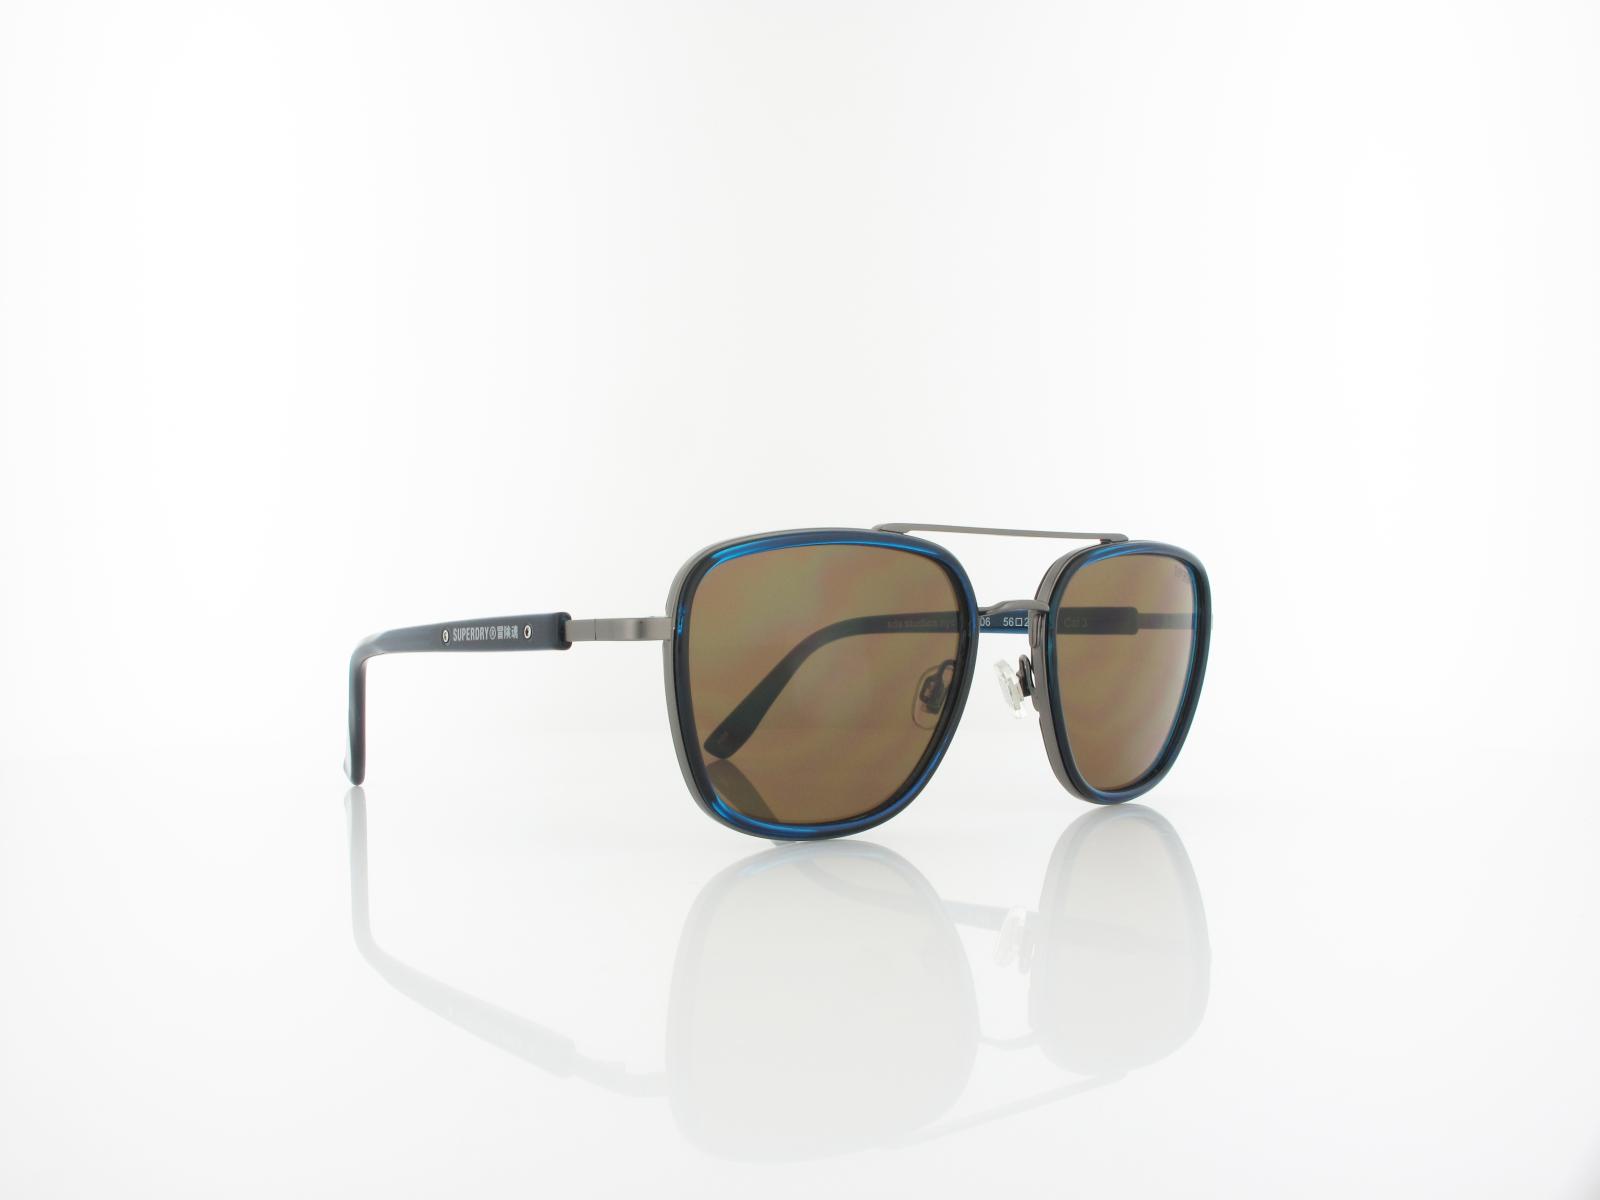 Superdry | Studios nyc 106 56 | navy / solid brown with silver mirror